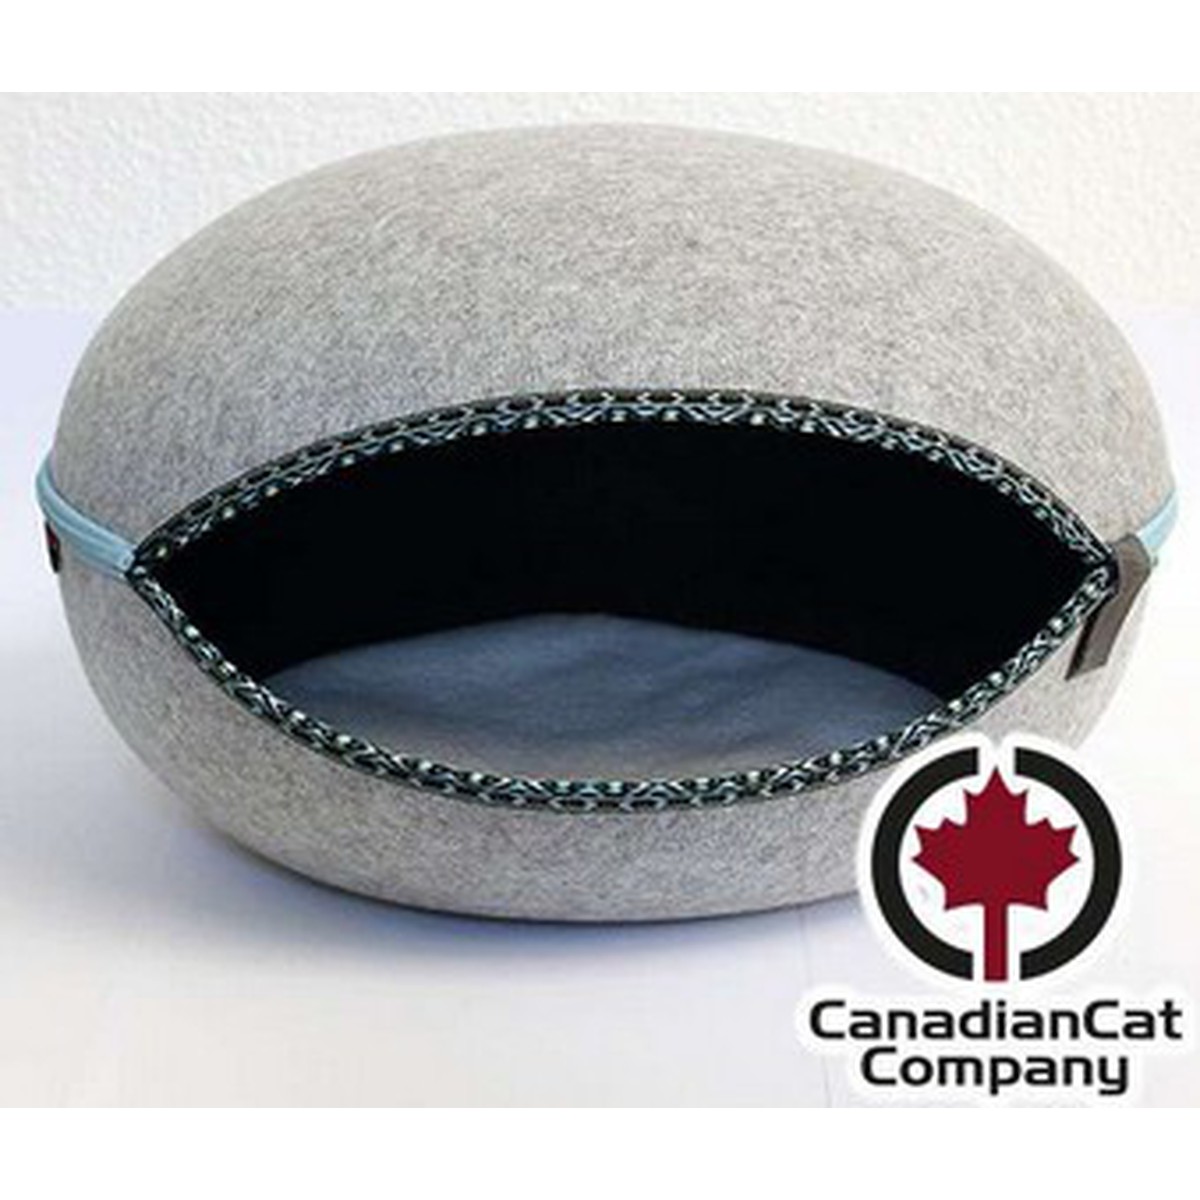   Nid pour chat  Canadian cat compagny  Yukon gris Gris 52 x 45 x 33 cm